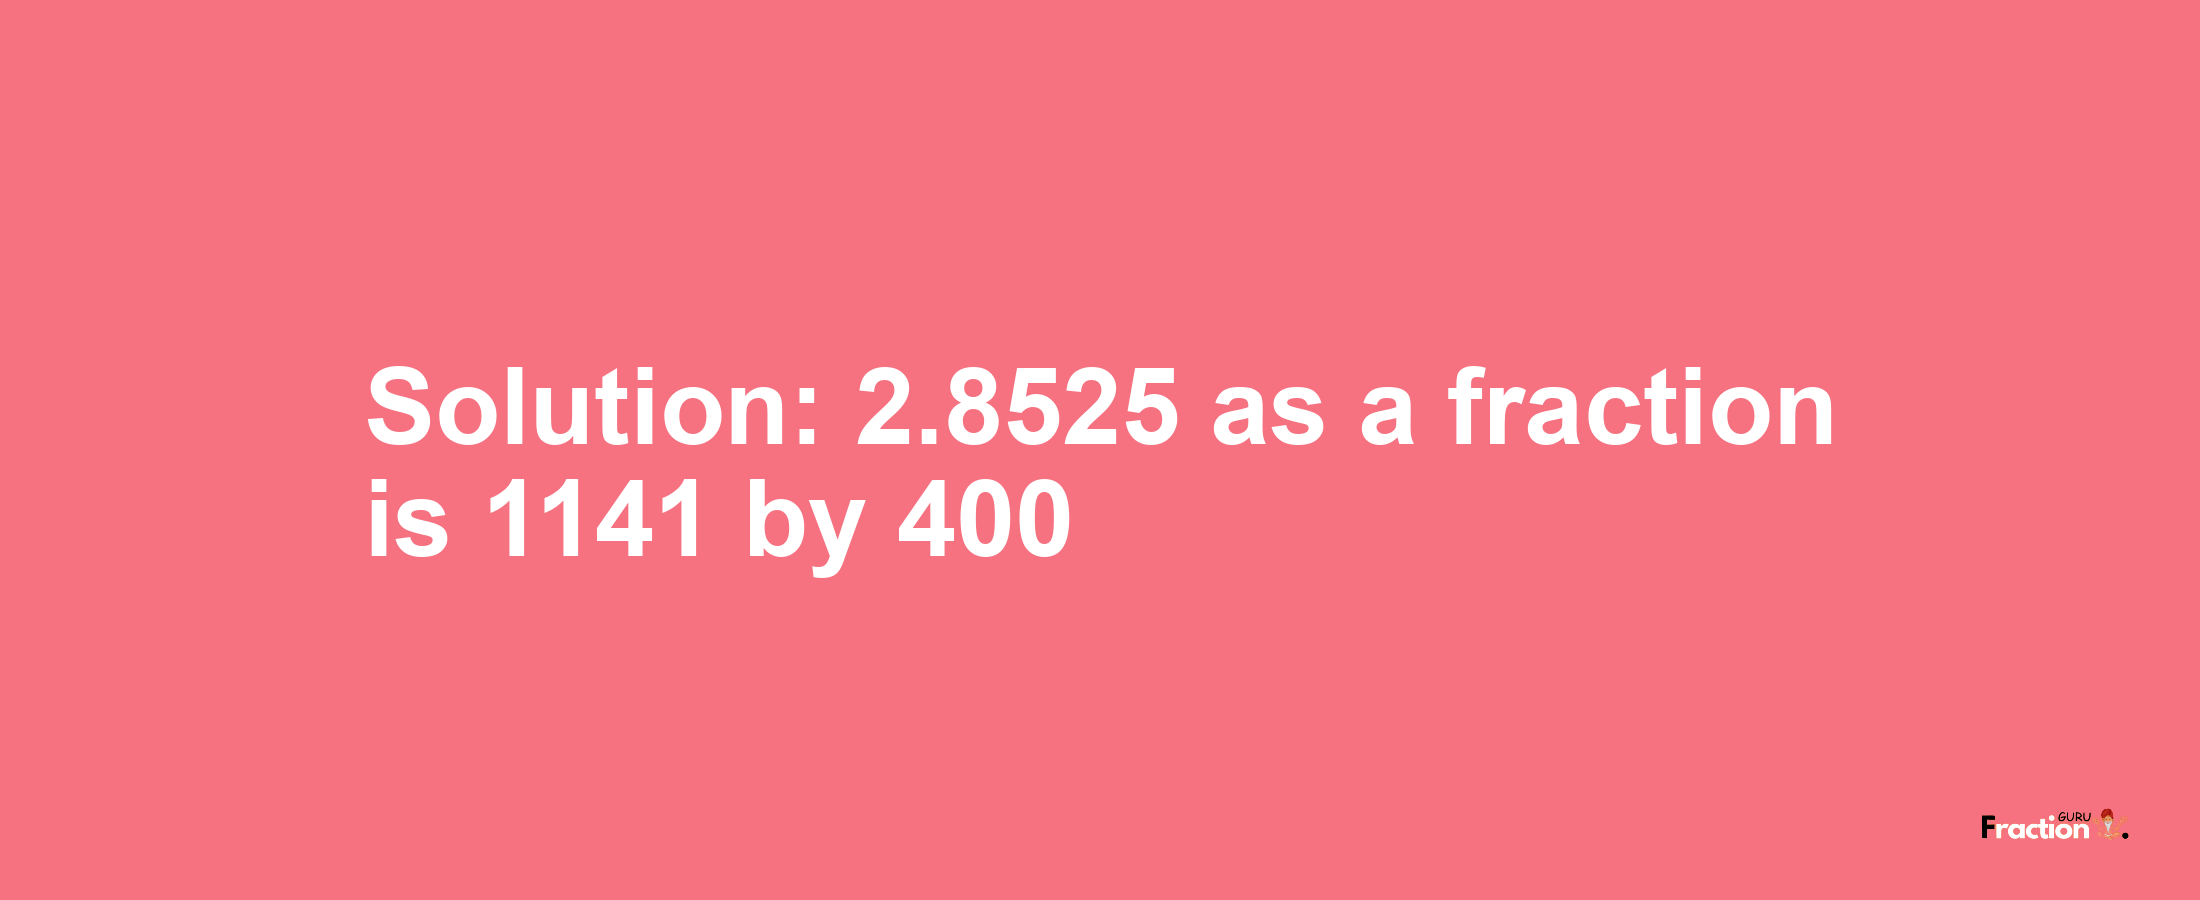 Solution:2.8525 as a fraction is 1141/400